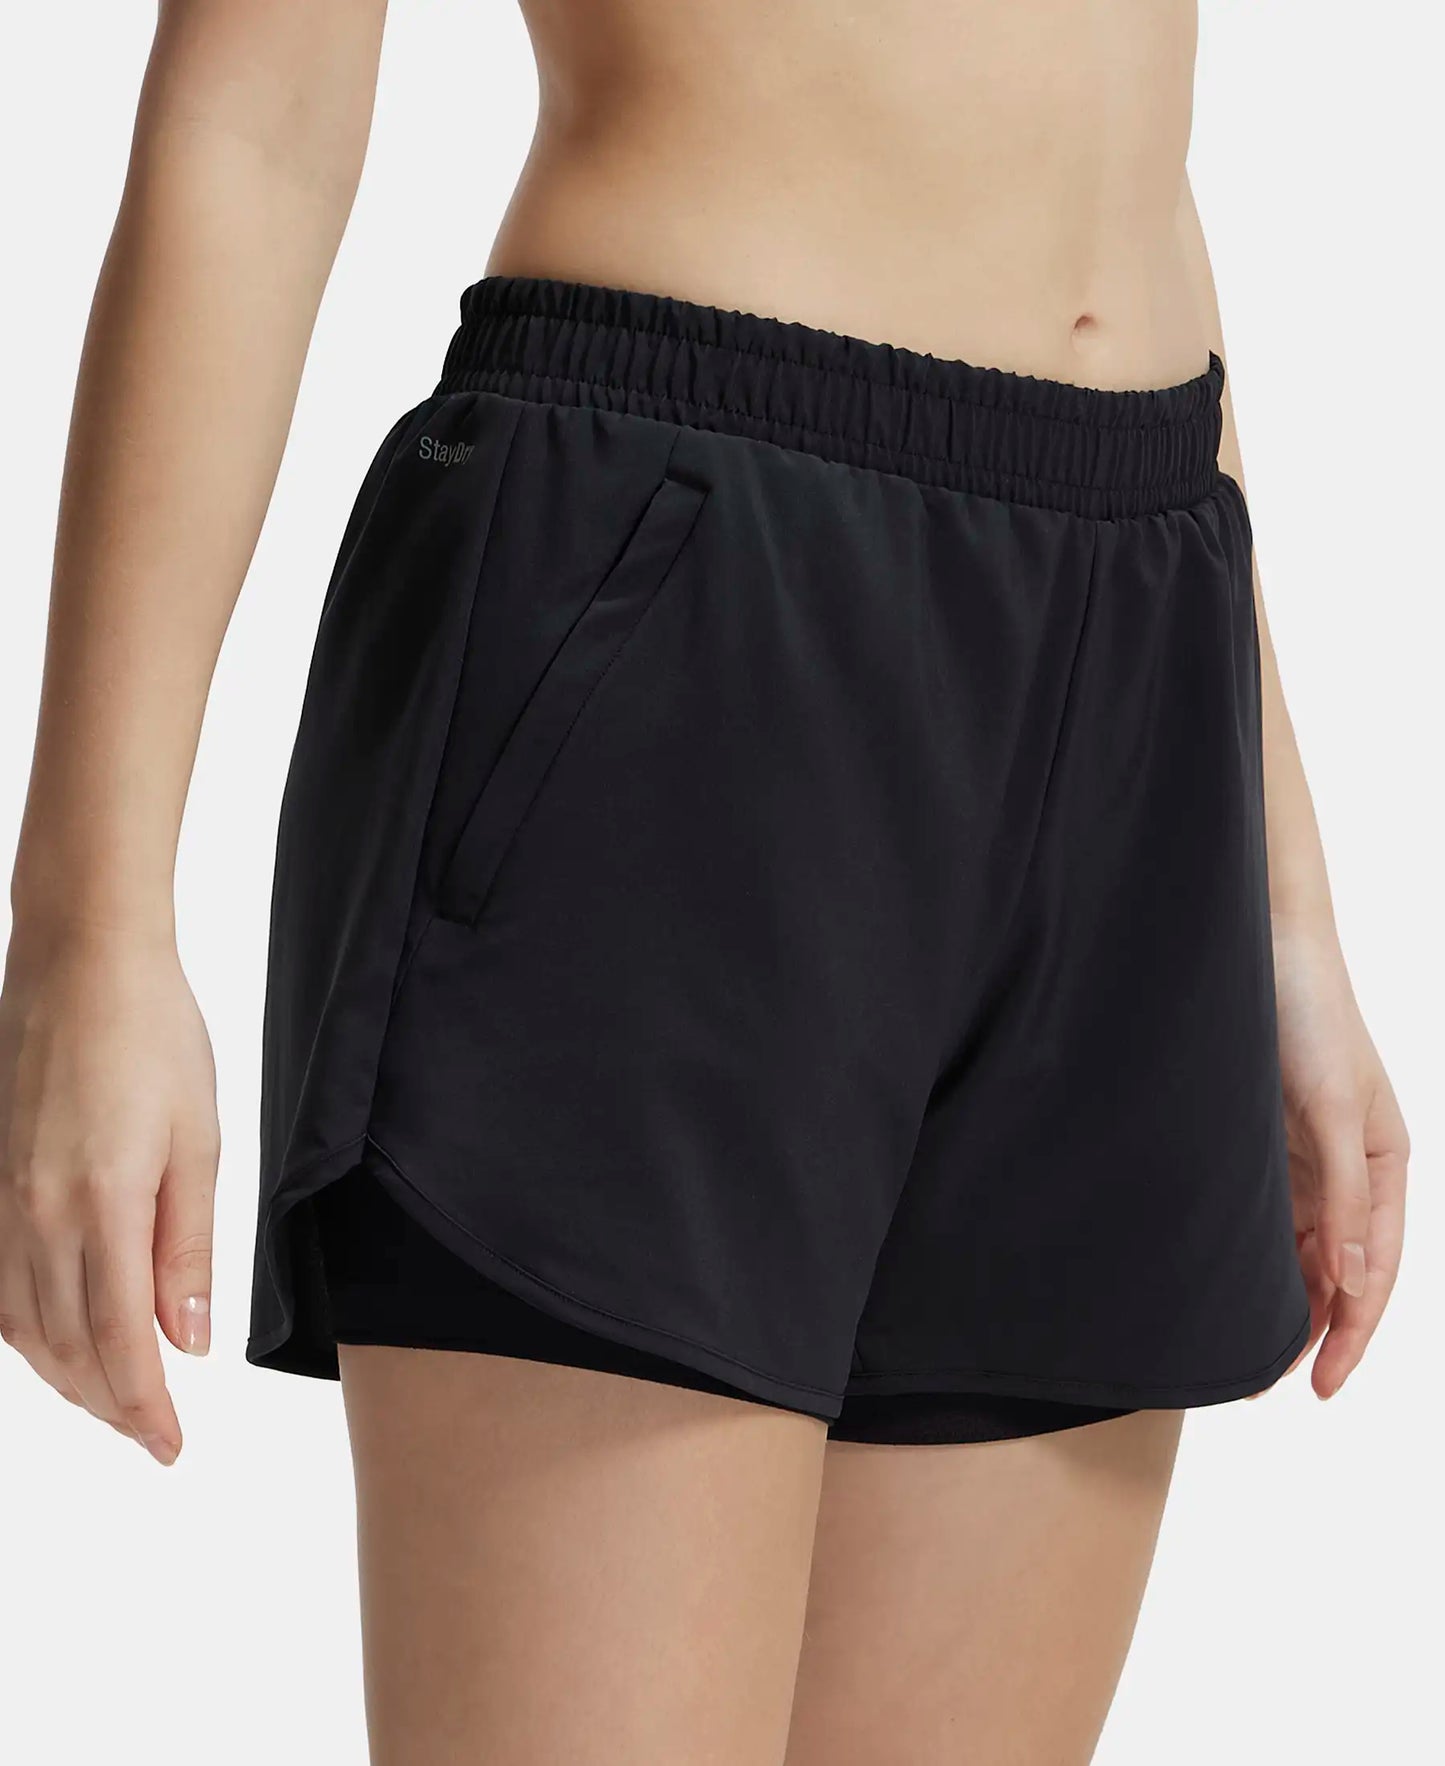 Microfiber Elastane Double Layered Woven Fabric Regular Fit Shorts with Zipper Pockets - Black-2